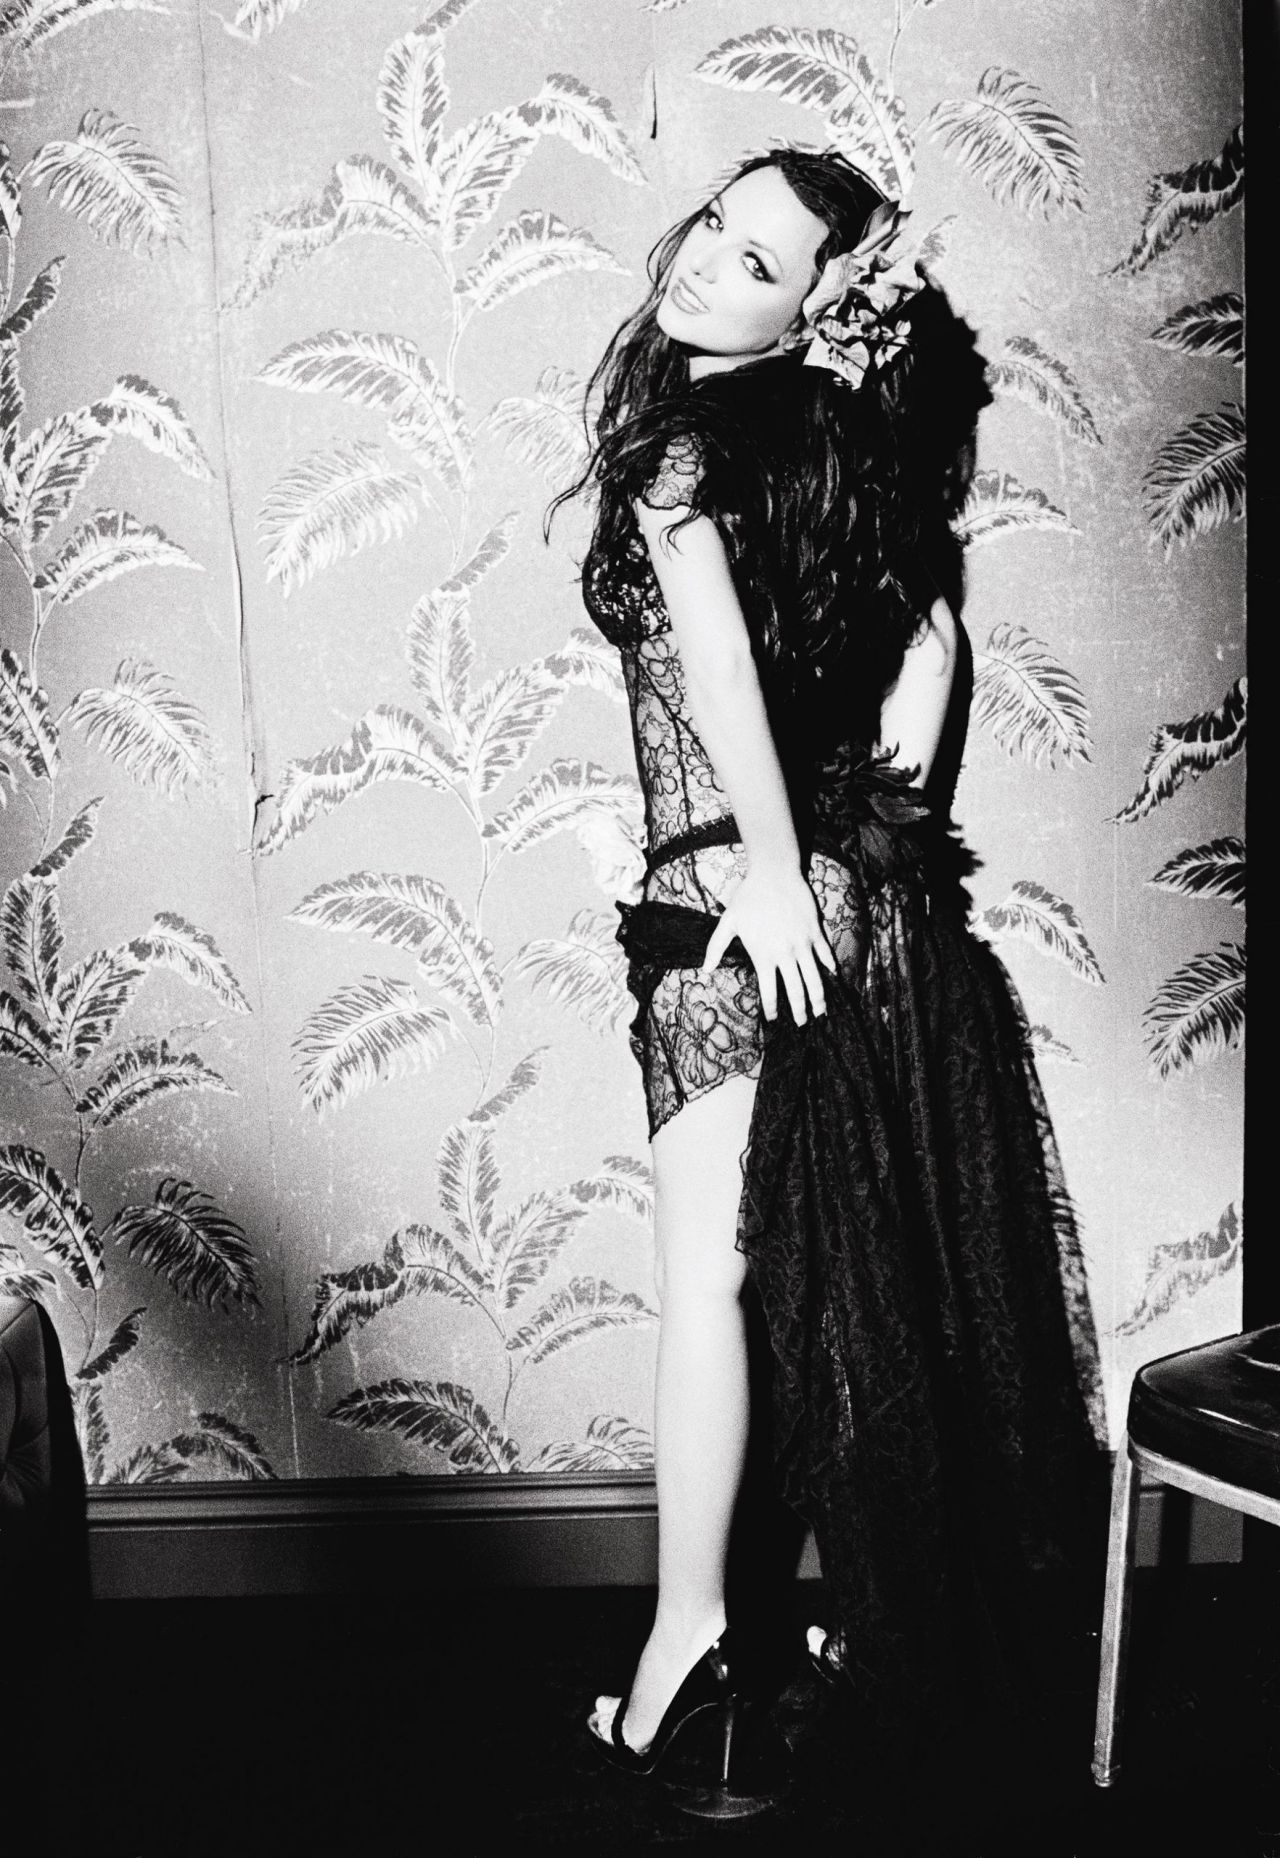  Britney Spears as a vintage time traveler (#3) Ellen von Unwerth. Check out the